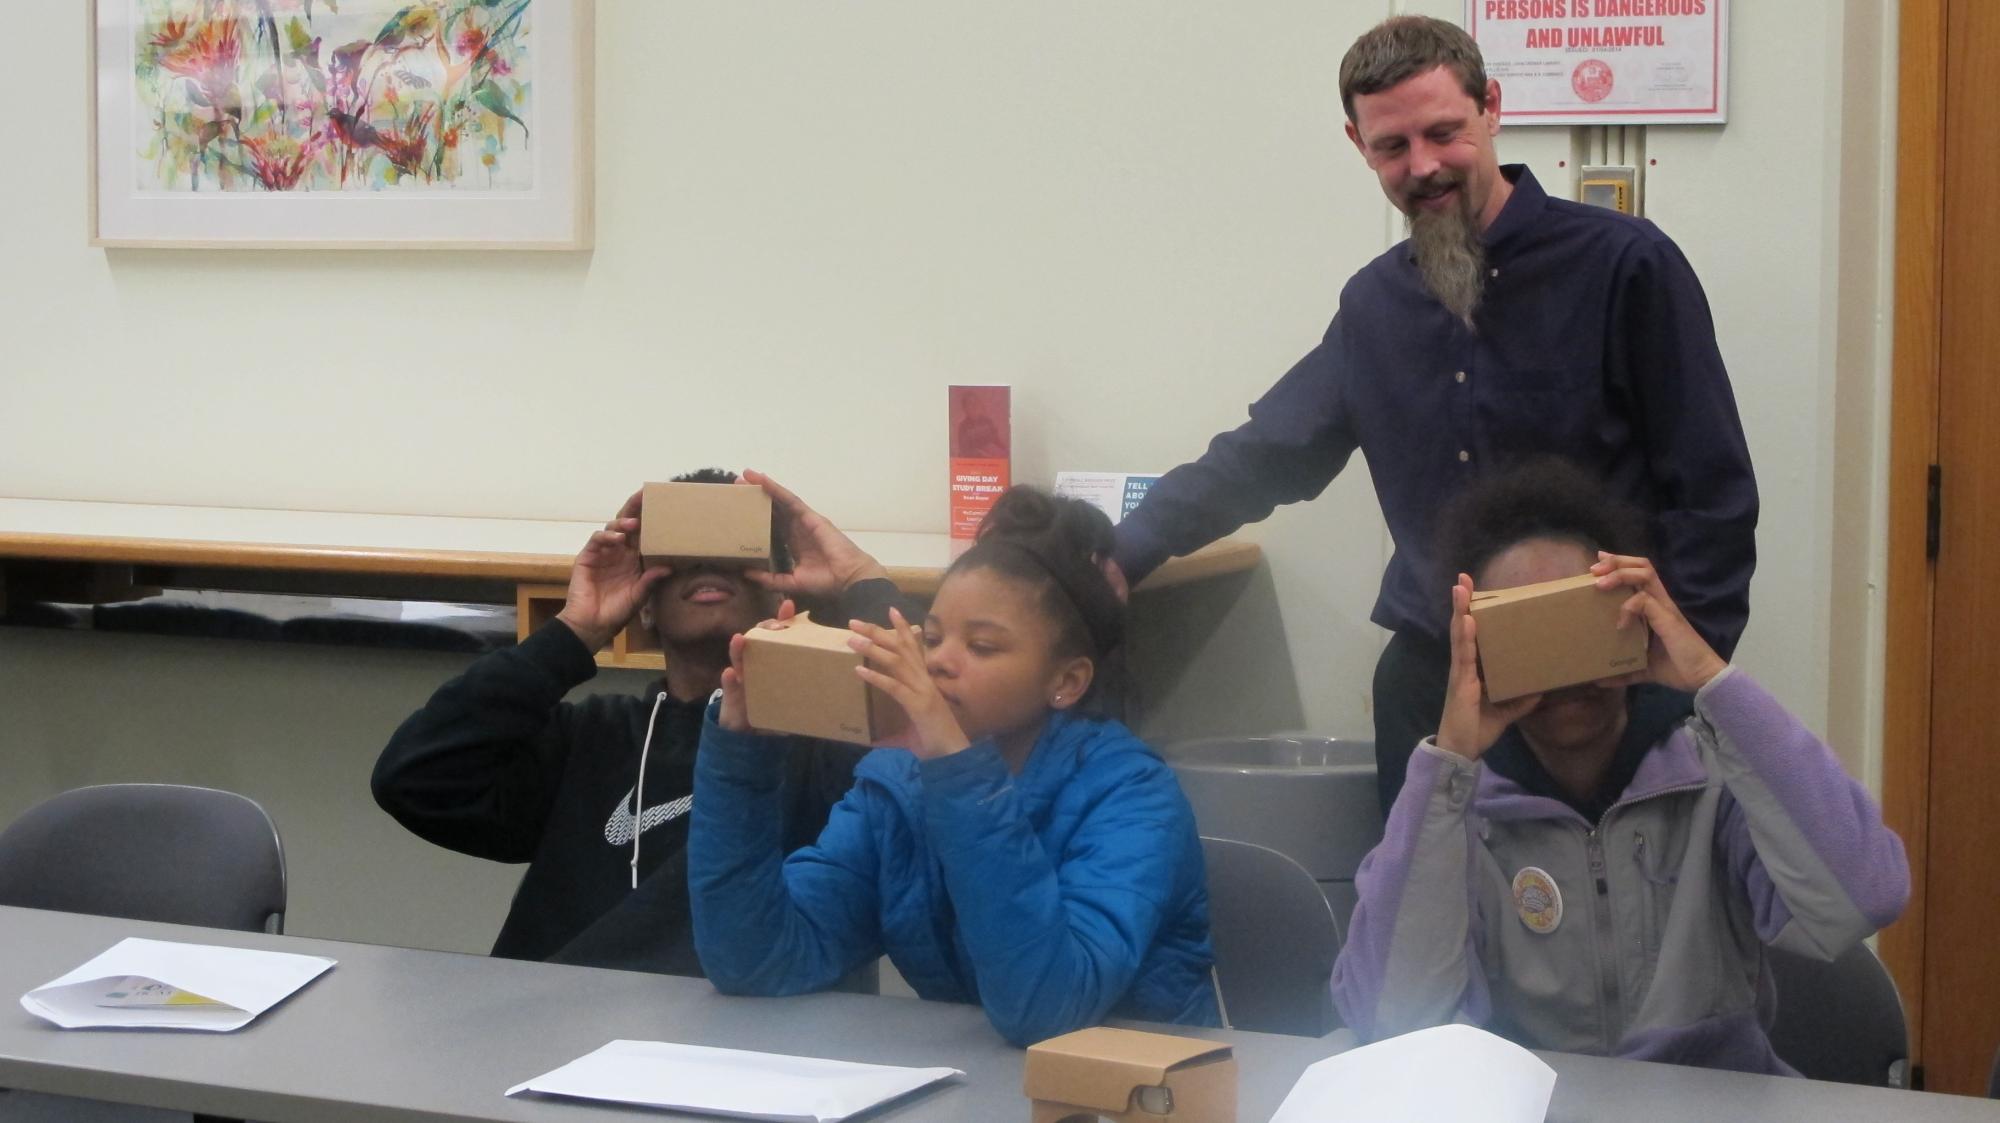 RCC digital humanities expert Jeff Tharsen watches over UCW students trying out Google Cardboard for the first time.